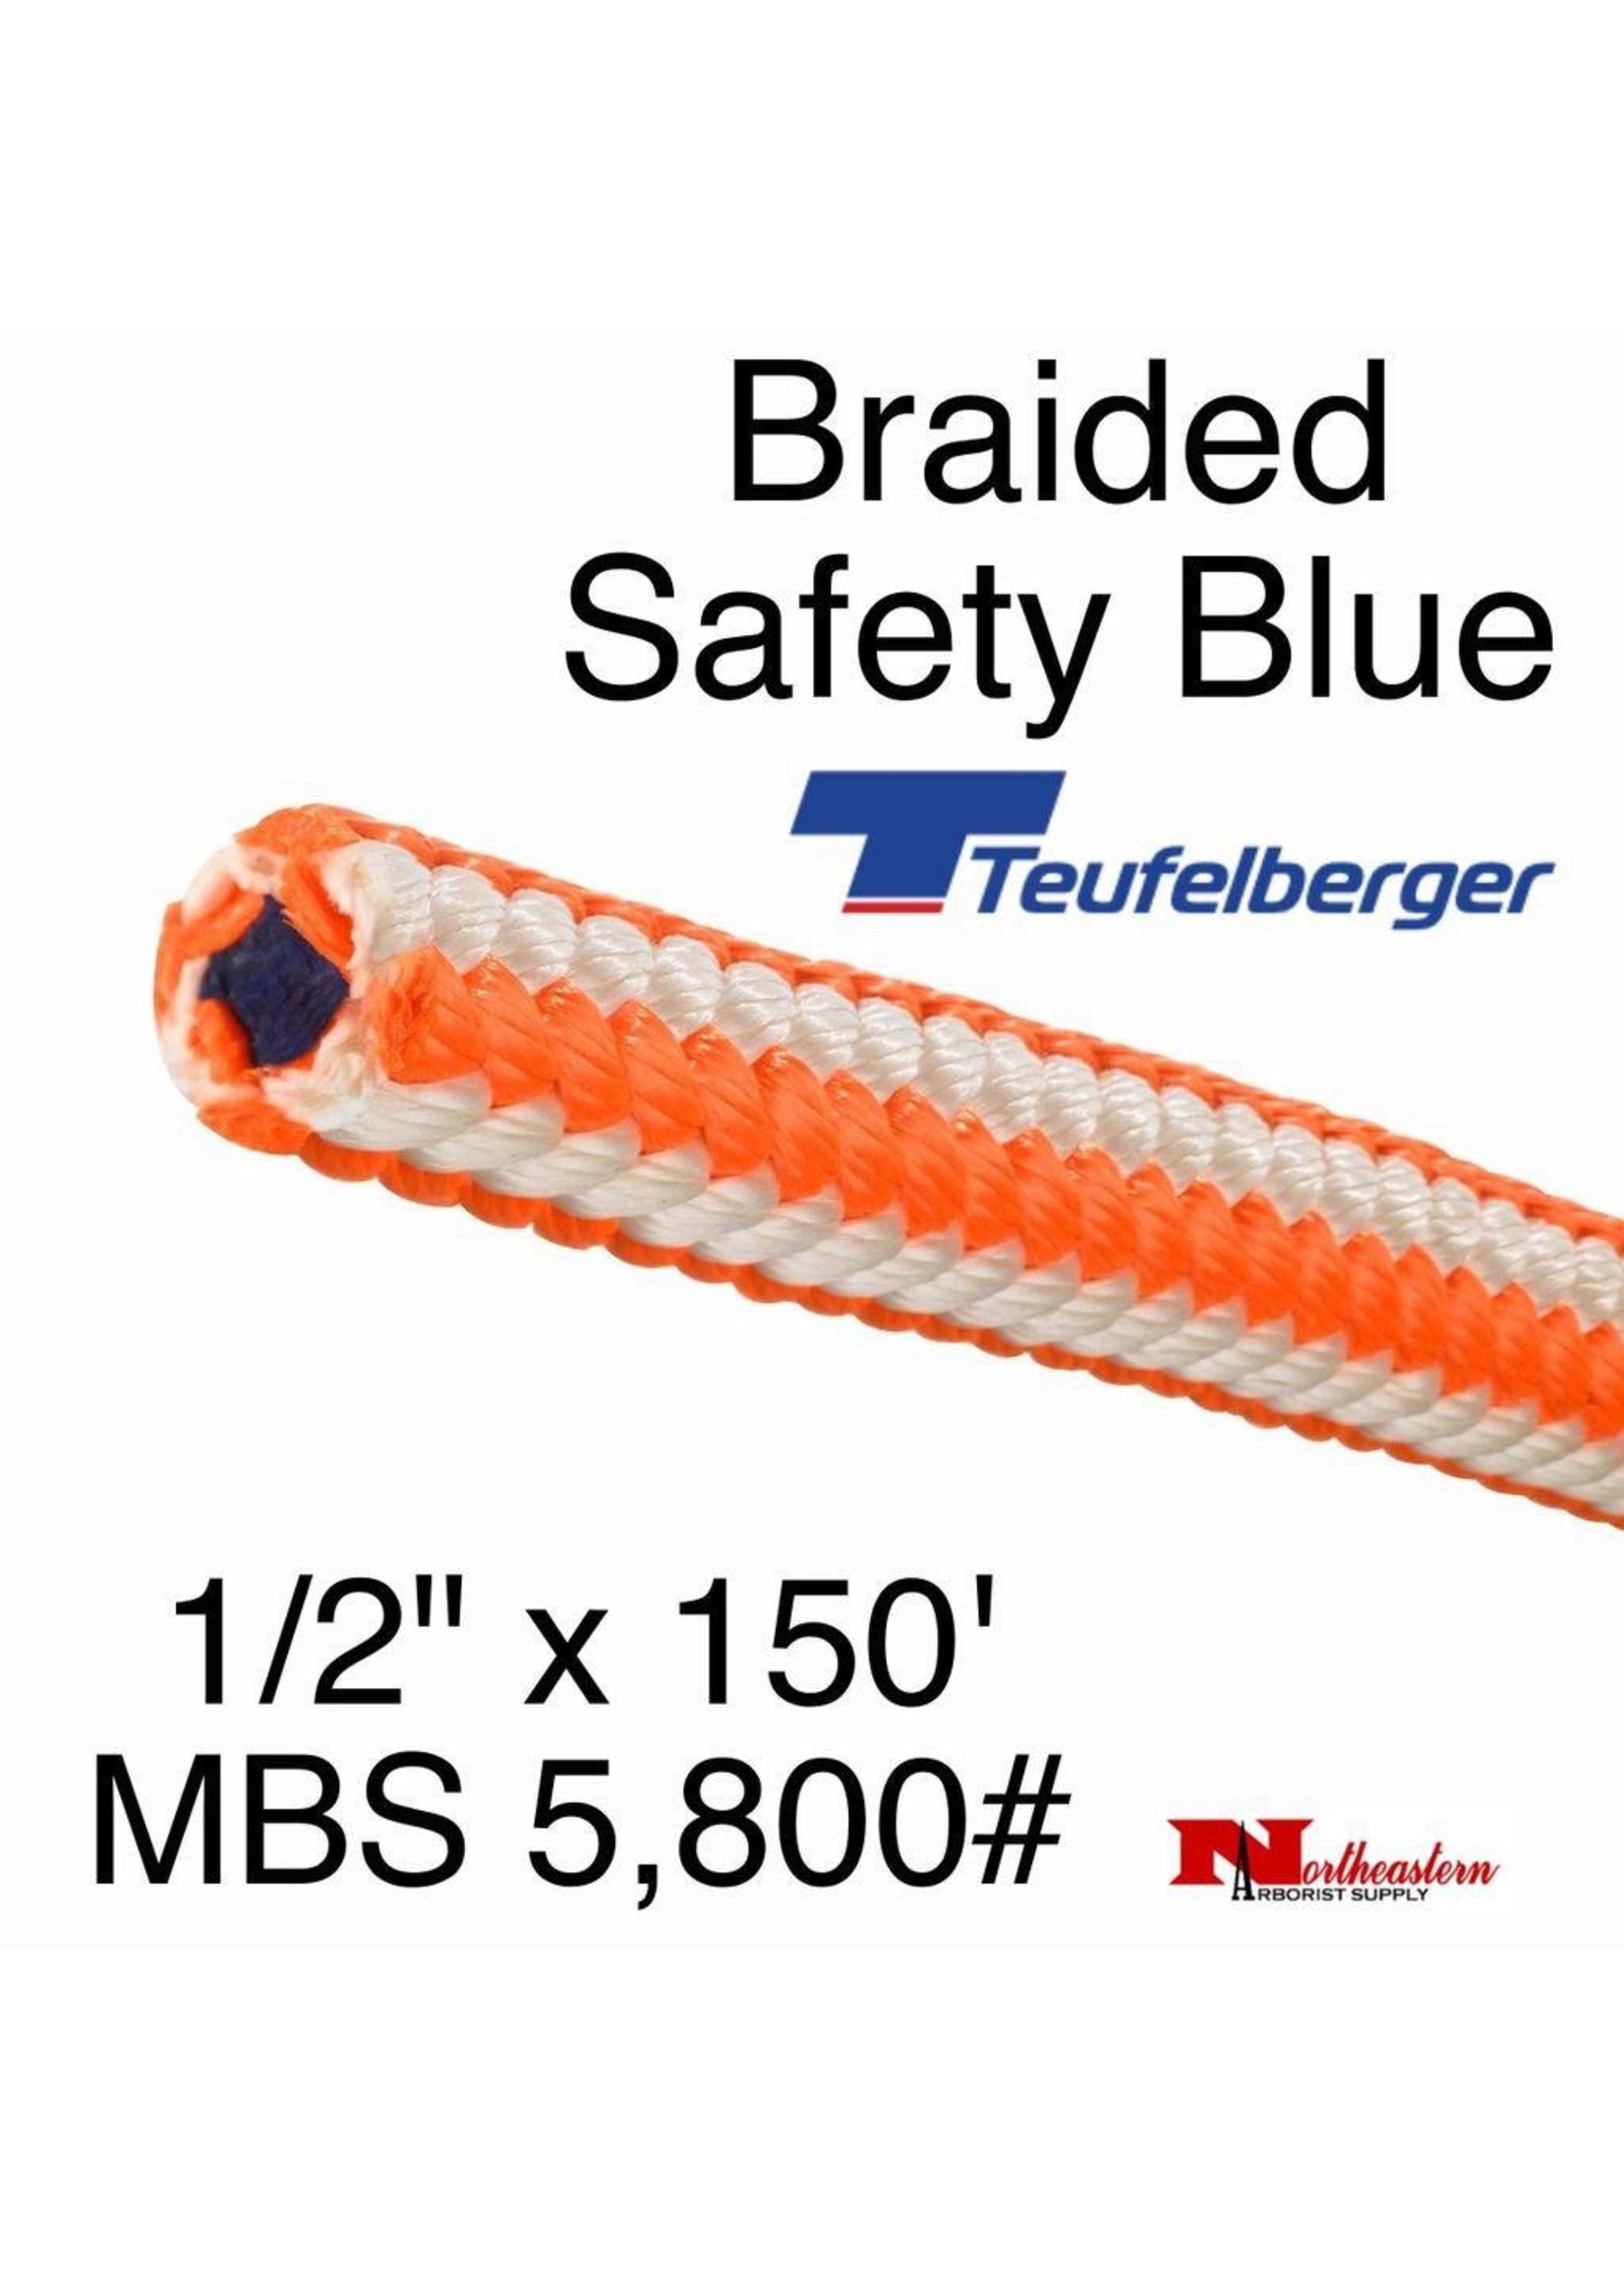 Teufelberger Braided Safety Blue Hi-Vee 1/2" x 150' - MBS 5,800# (New)